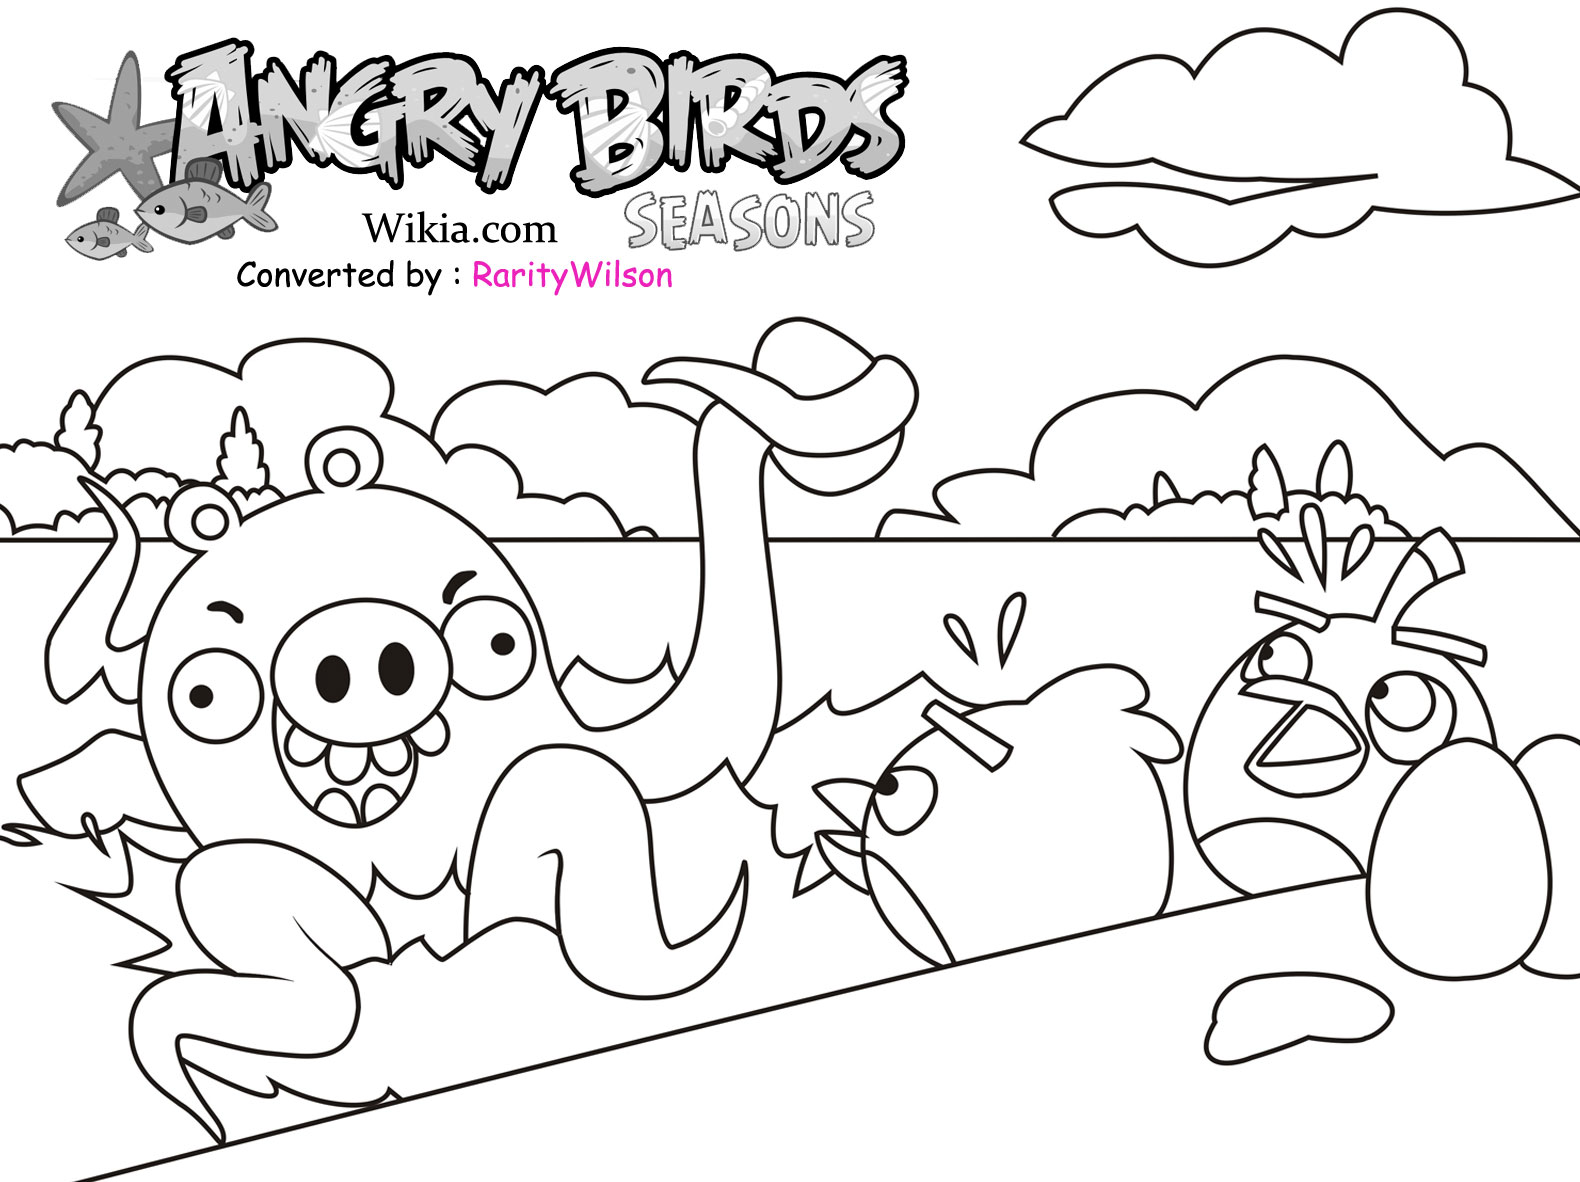 Angry Birds Season Coloring Pages | Team colors